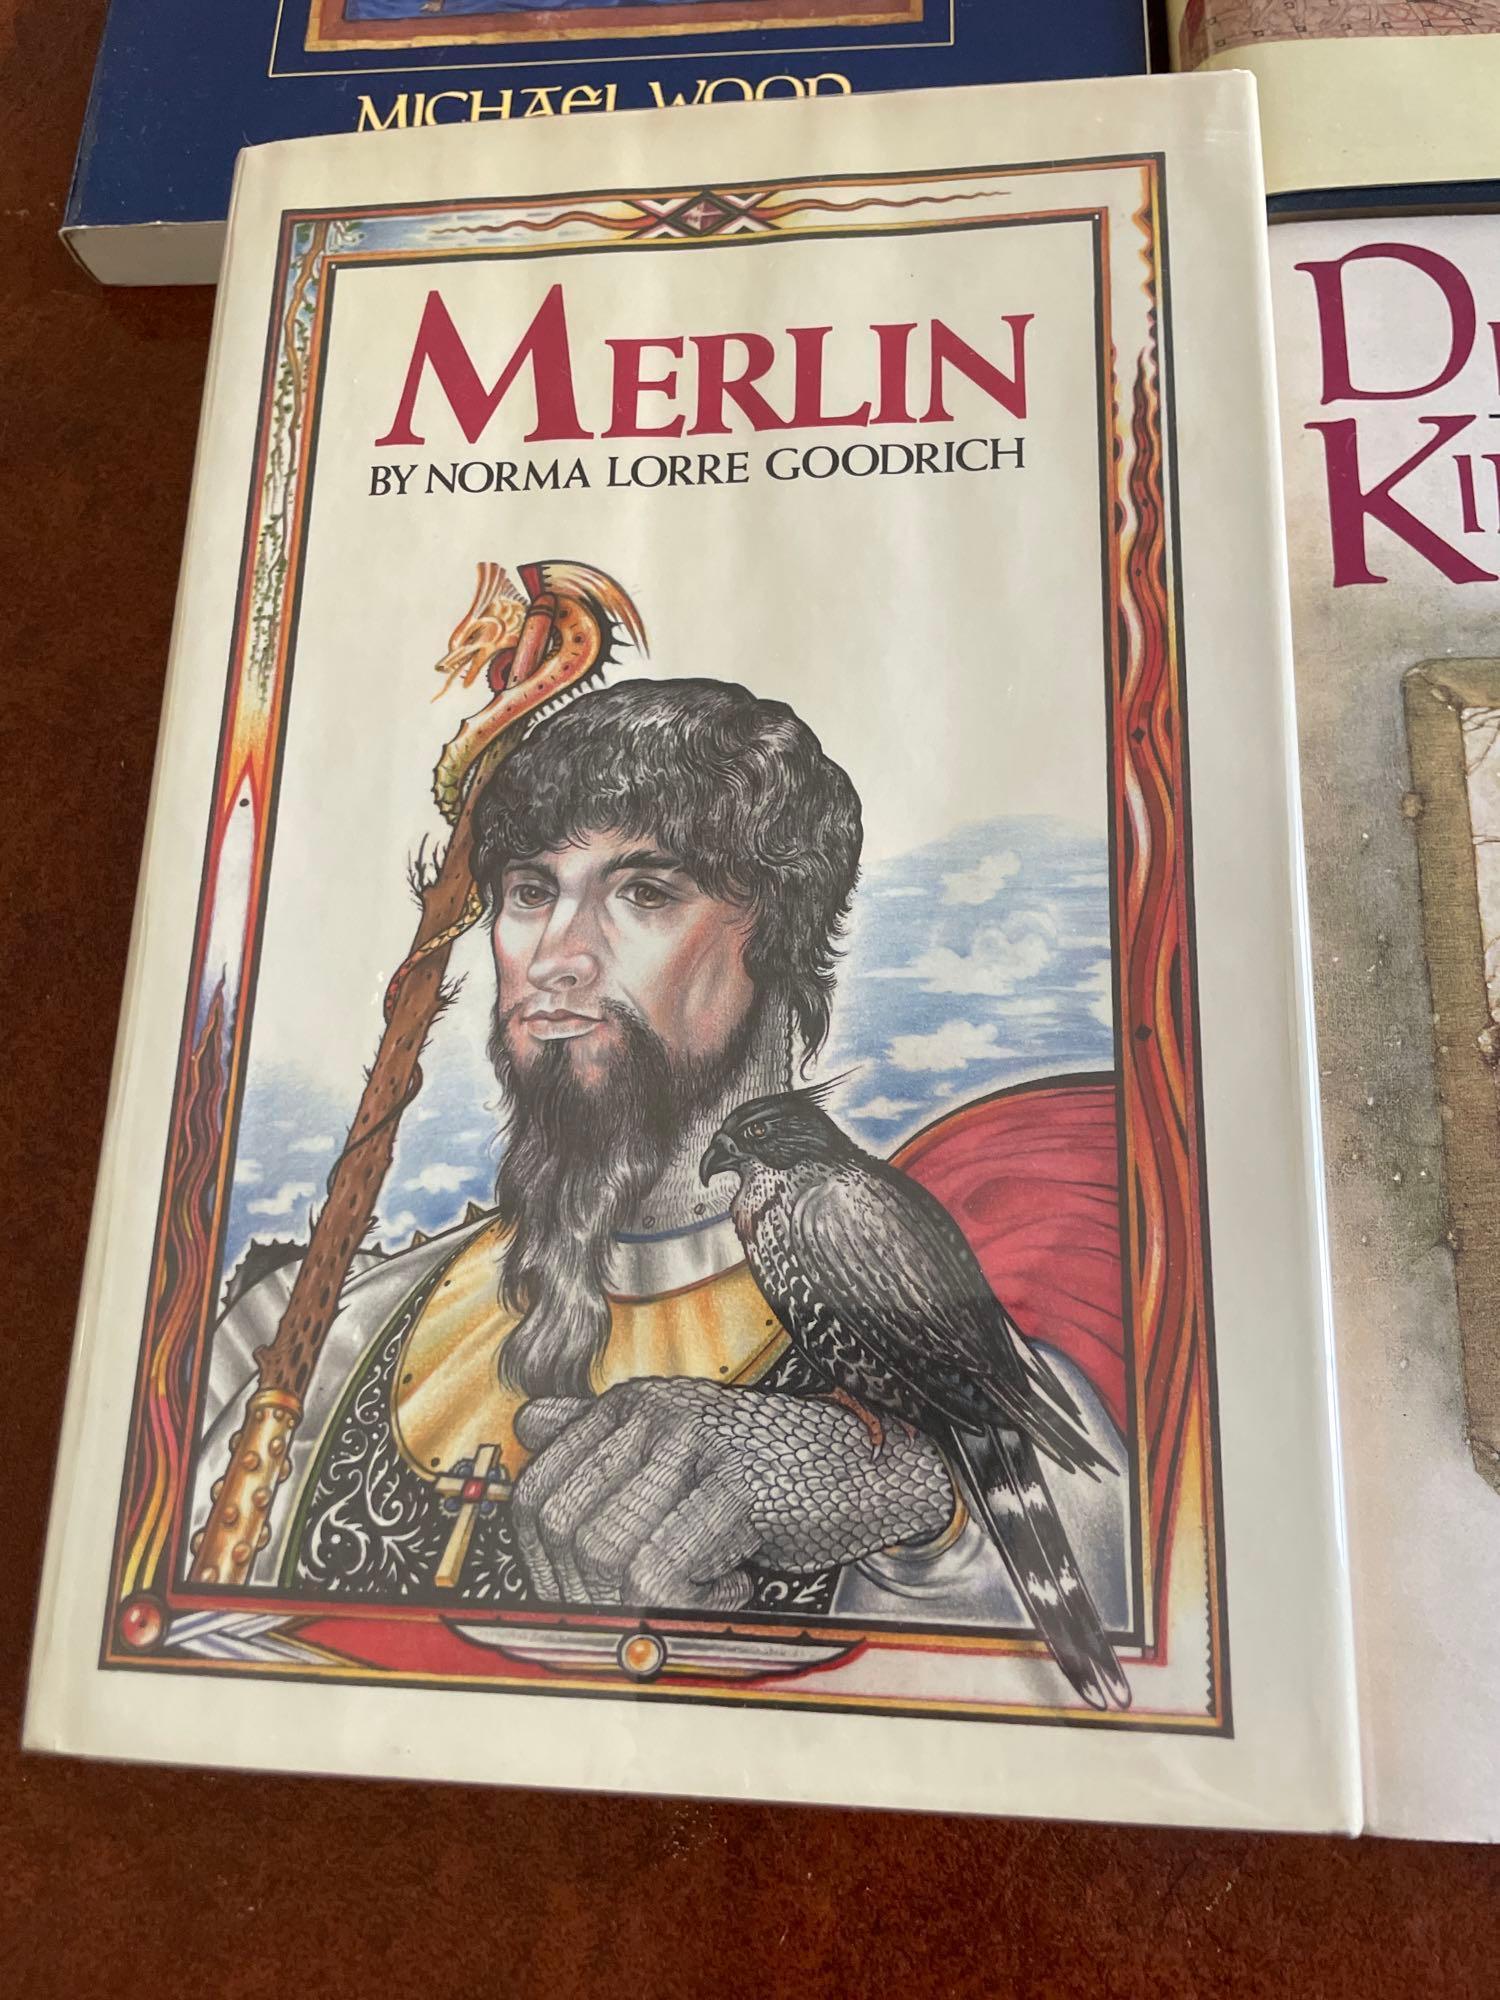 King Arthur, Merlin, and Dark Ages Books (4)